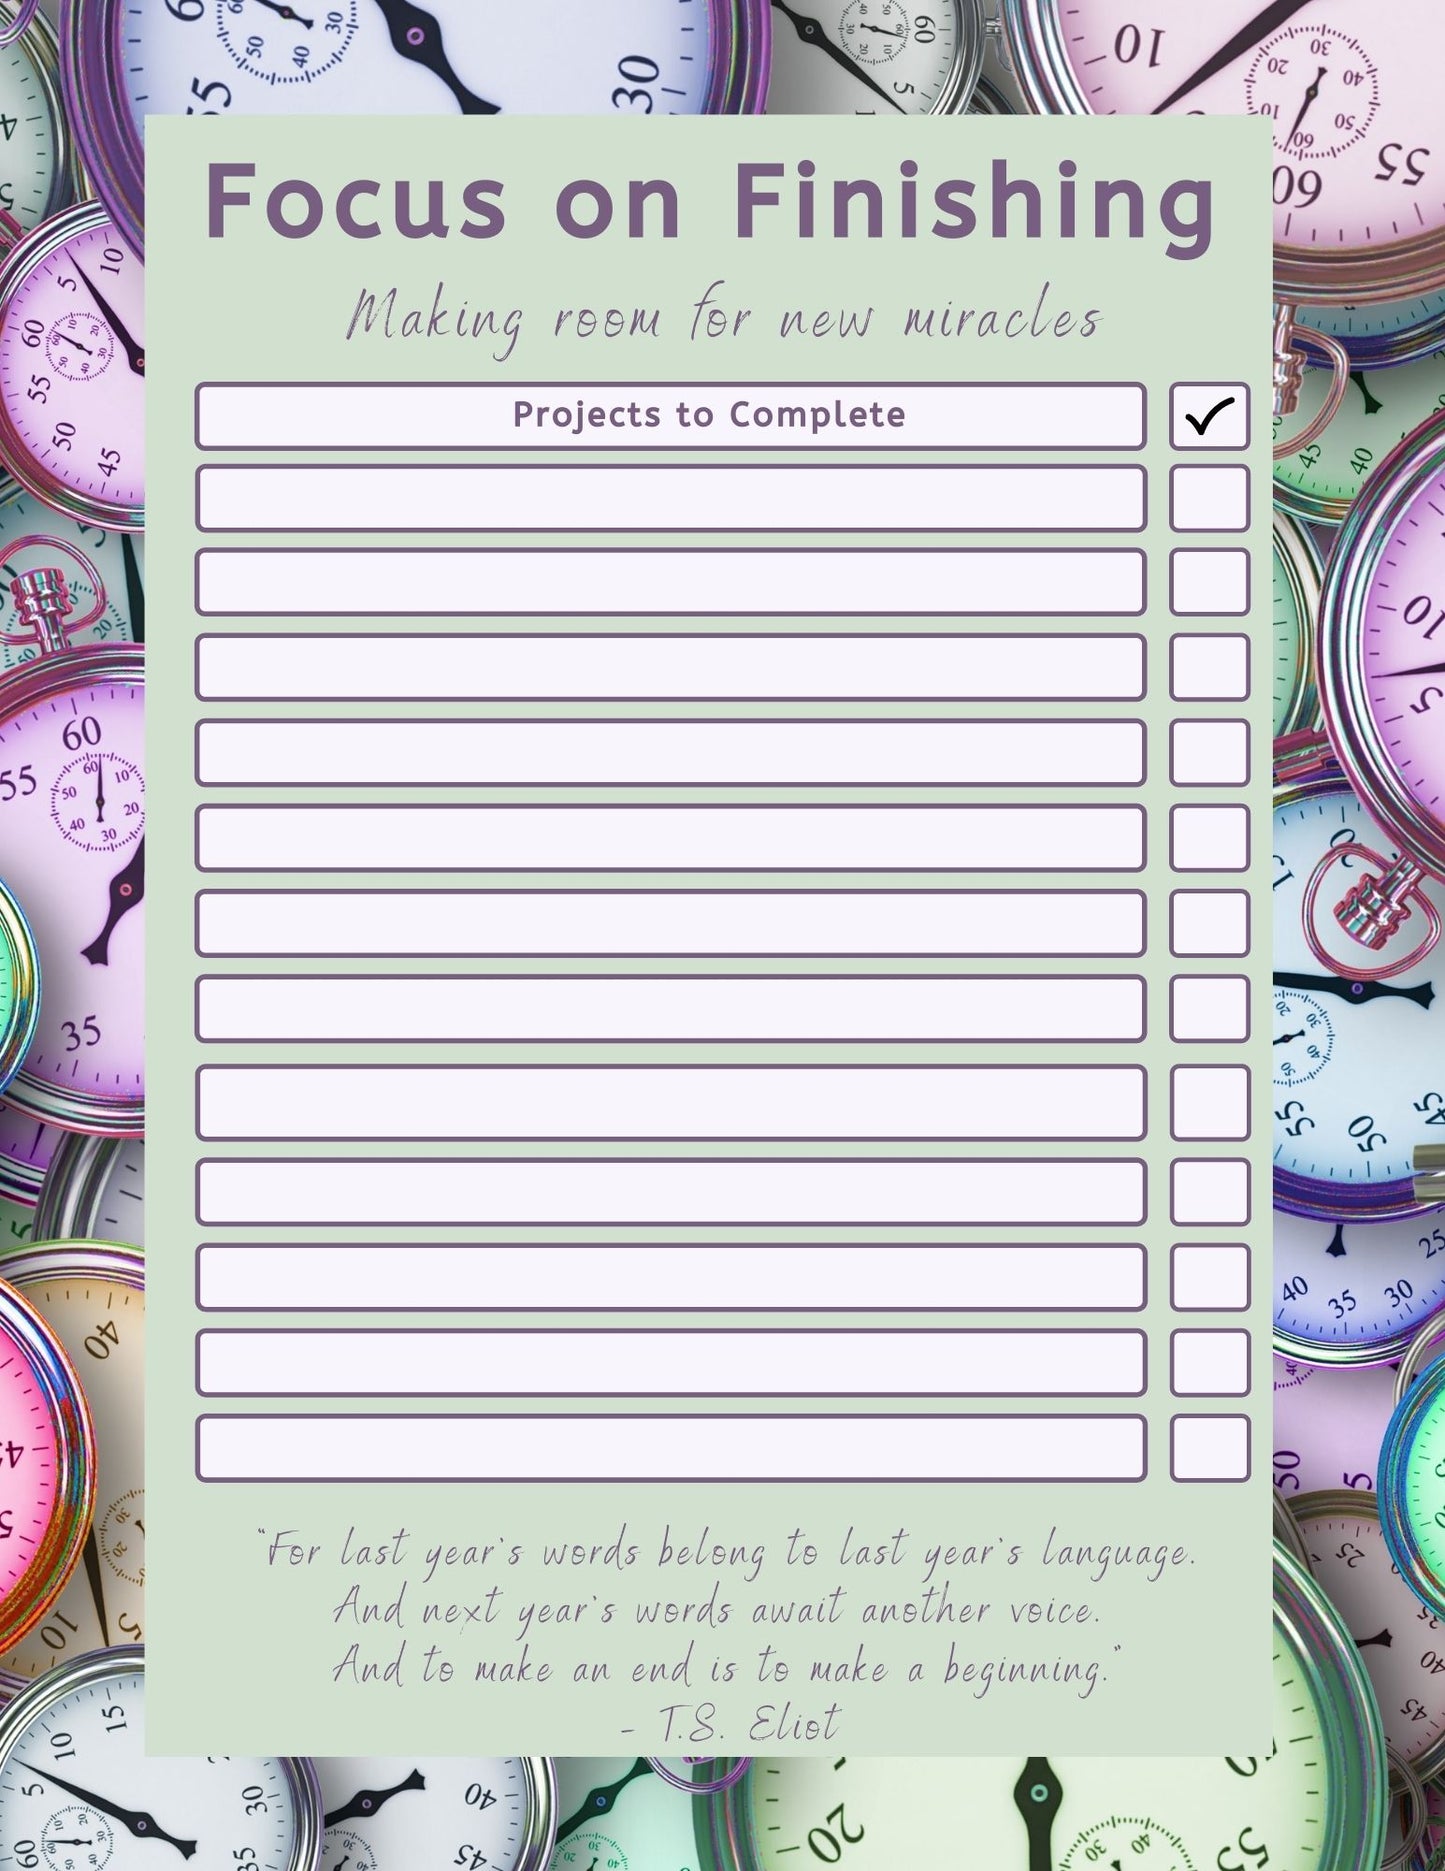 Focus on Finishing Project Planner